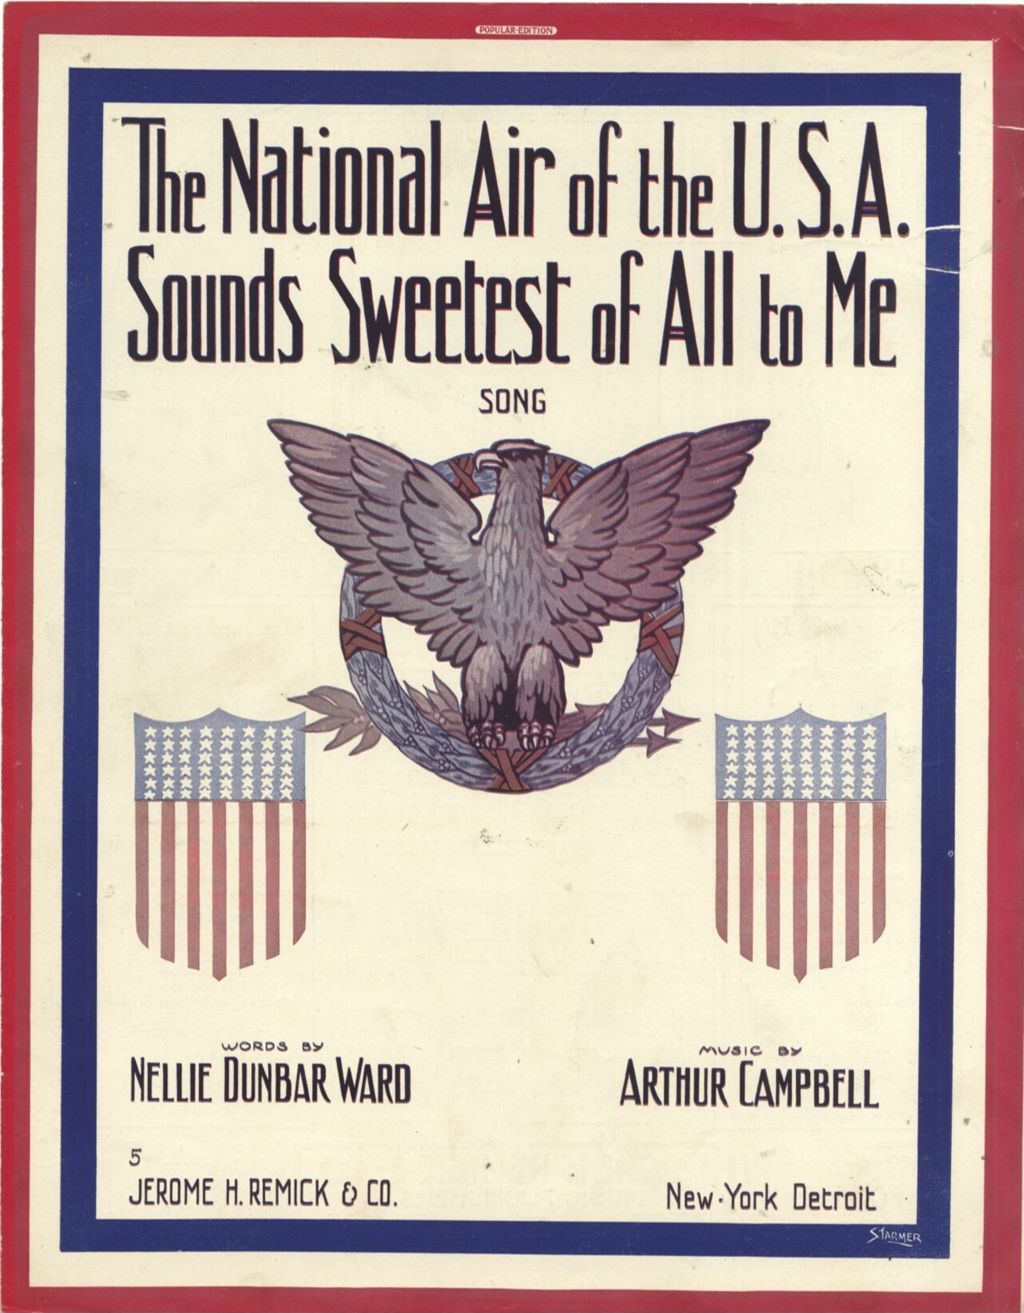 Miniature of National Air of the U.S.A. Sounds Sweetest of All To Me